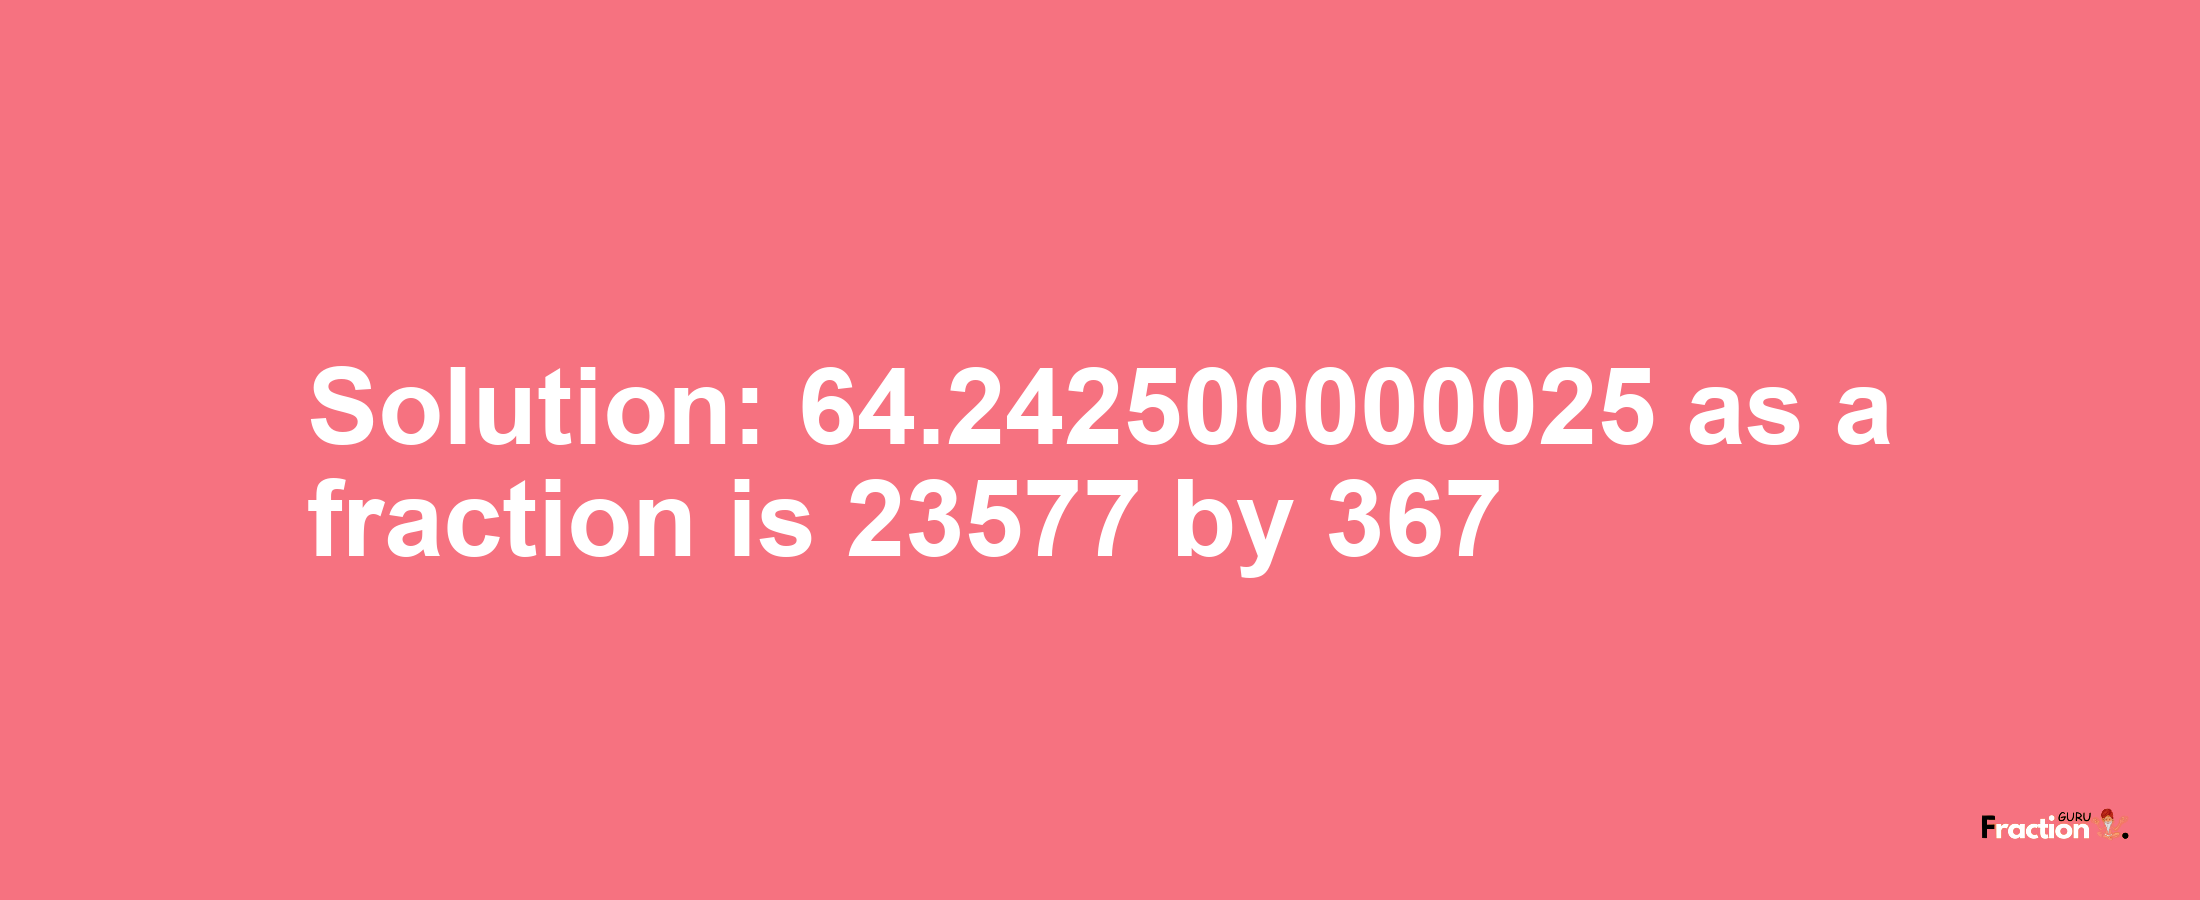 Solution:64.242500000025 as a fraction is 23577/367